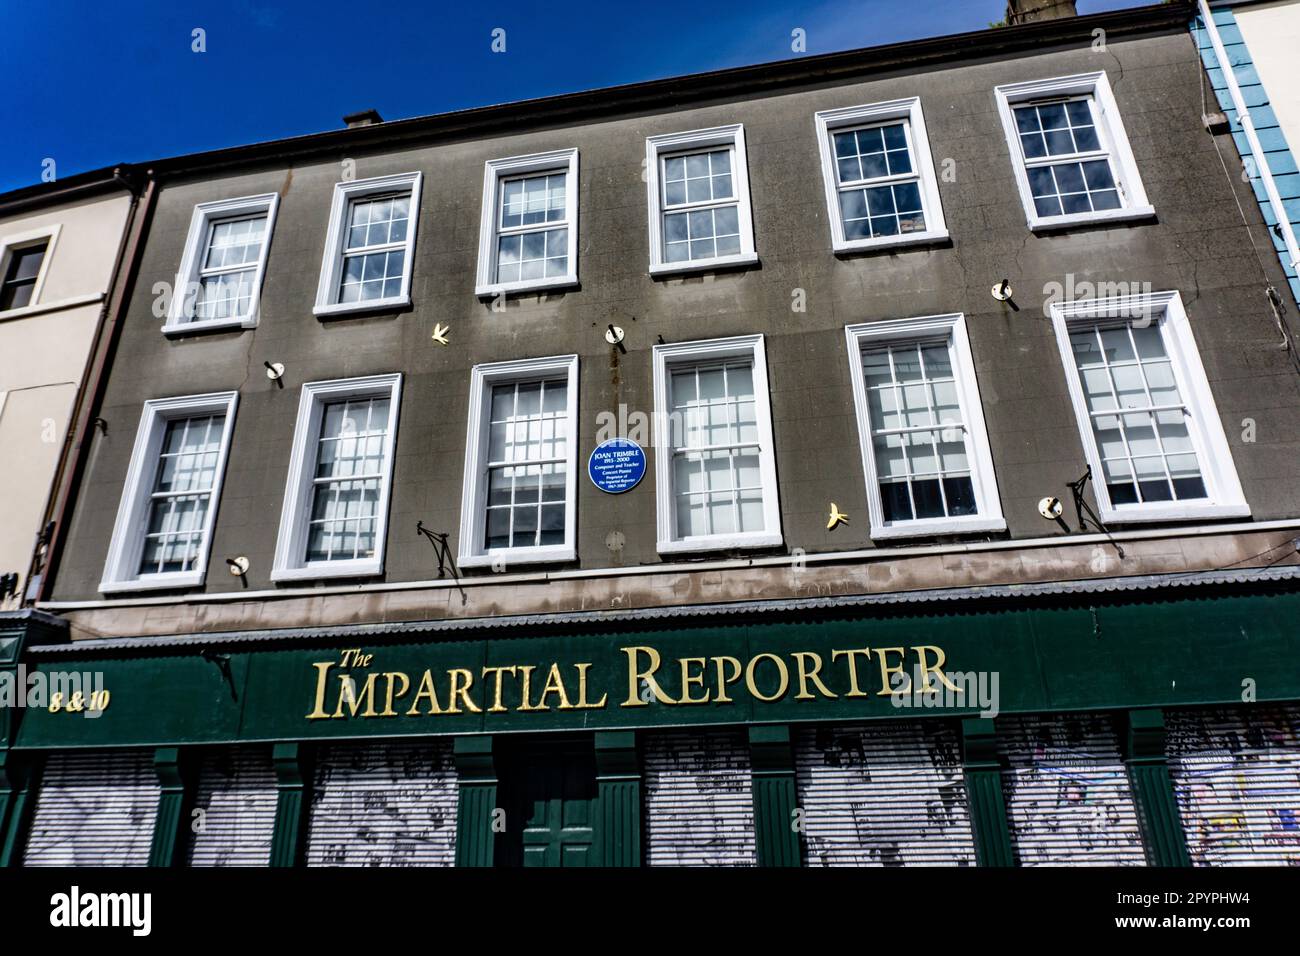 The Offices of The Impartial Reporter, founded in 1825, it is the 3rd oldest newspaper in Ireland. The plaque refers to Joan Trimble, former owner. Stock Photo